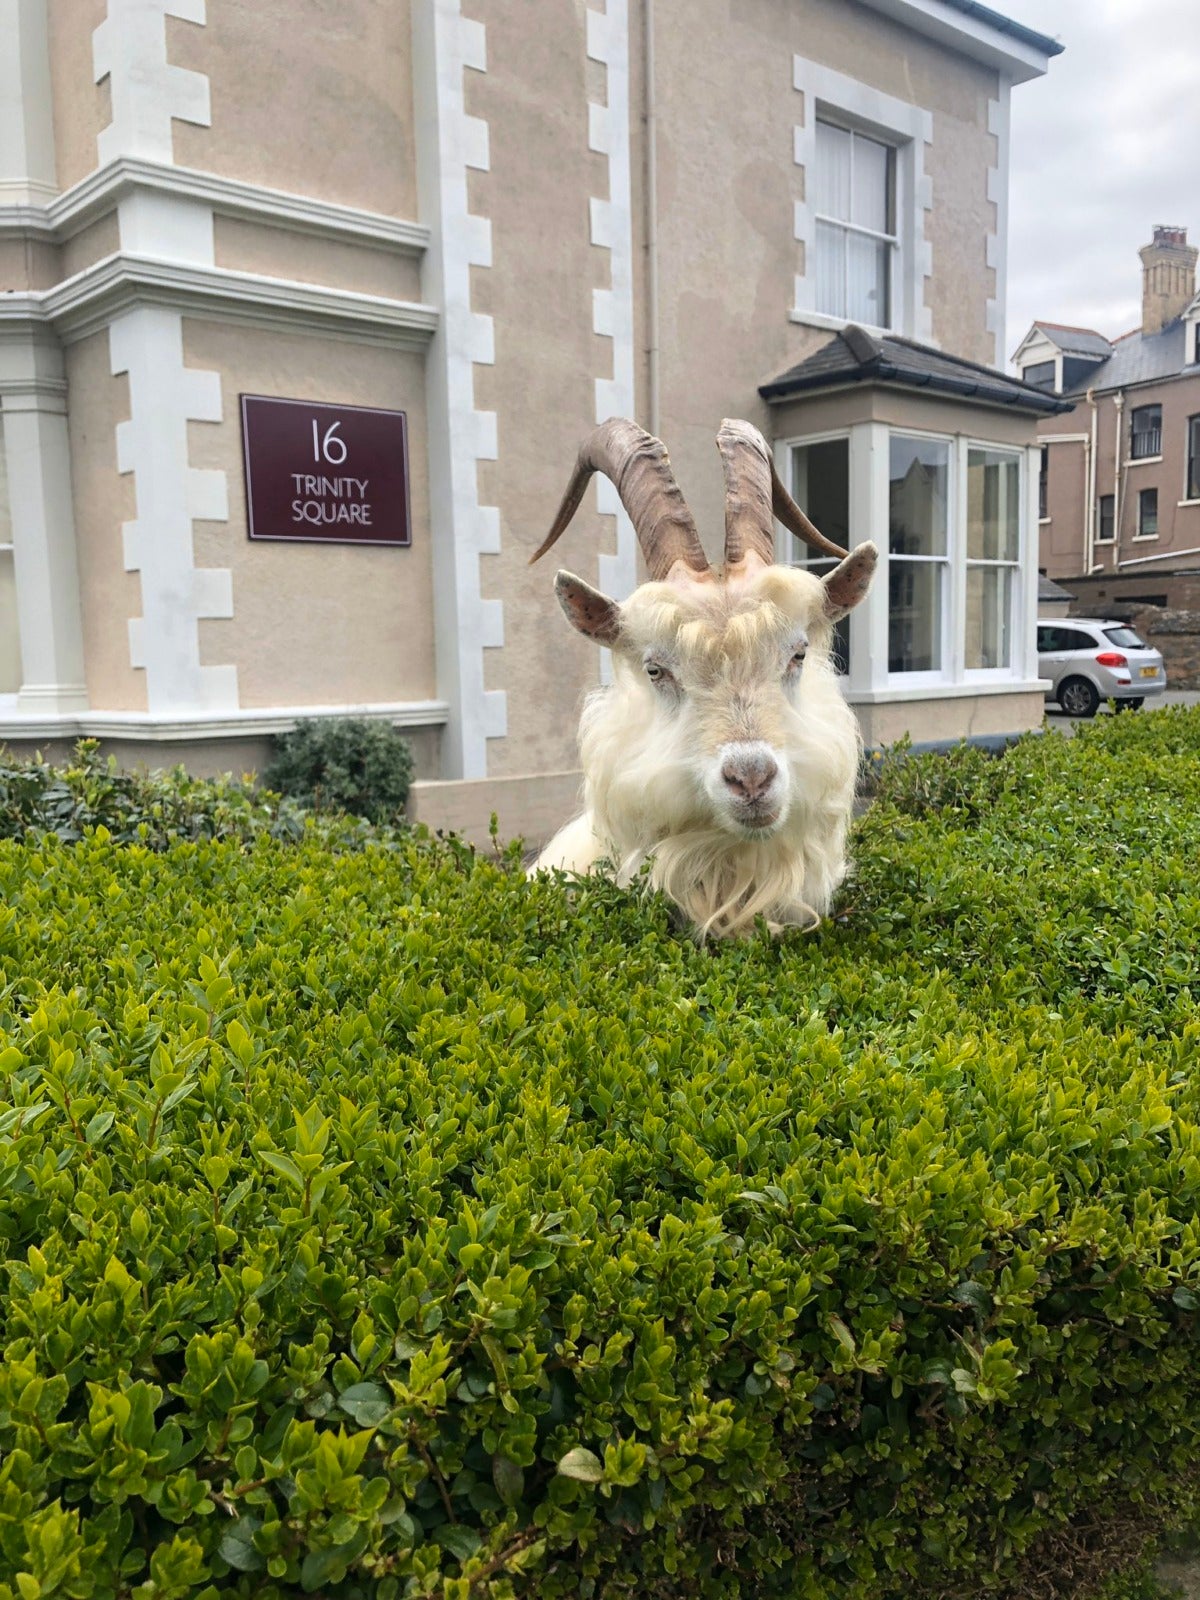 Cute, Fuzzy Mountain Goats Take Over Deserted Town After Covid-19 Forces Everyone To Stay Home - WORLD OF BUZZ 3